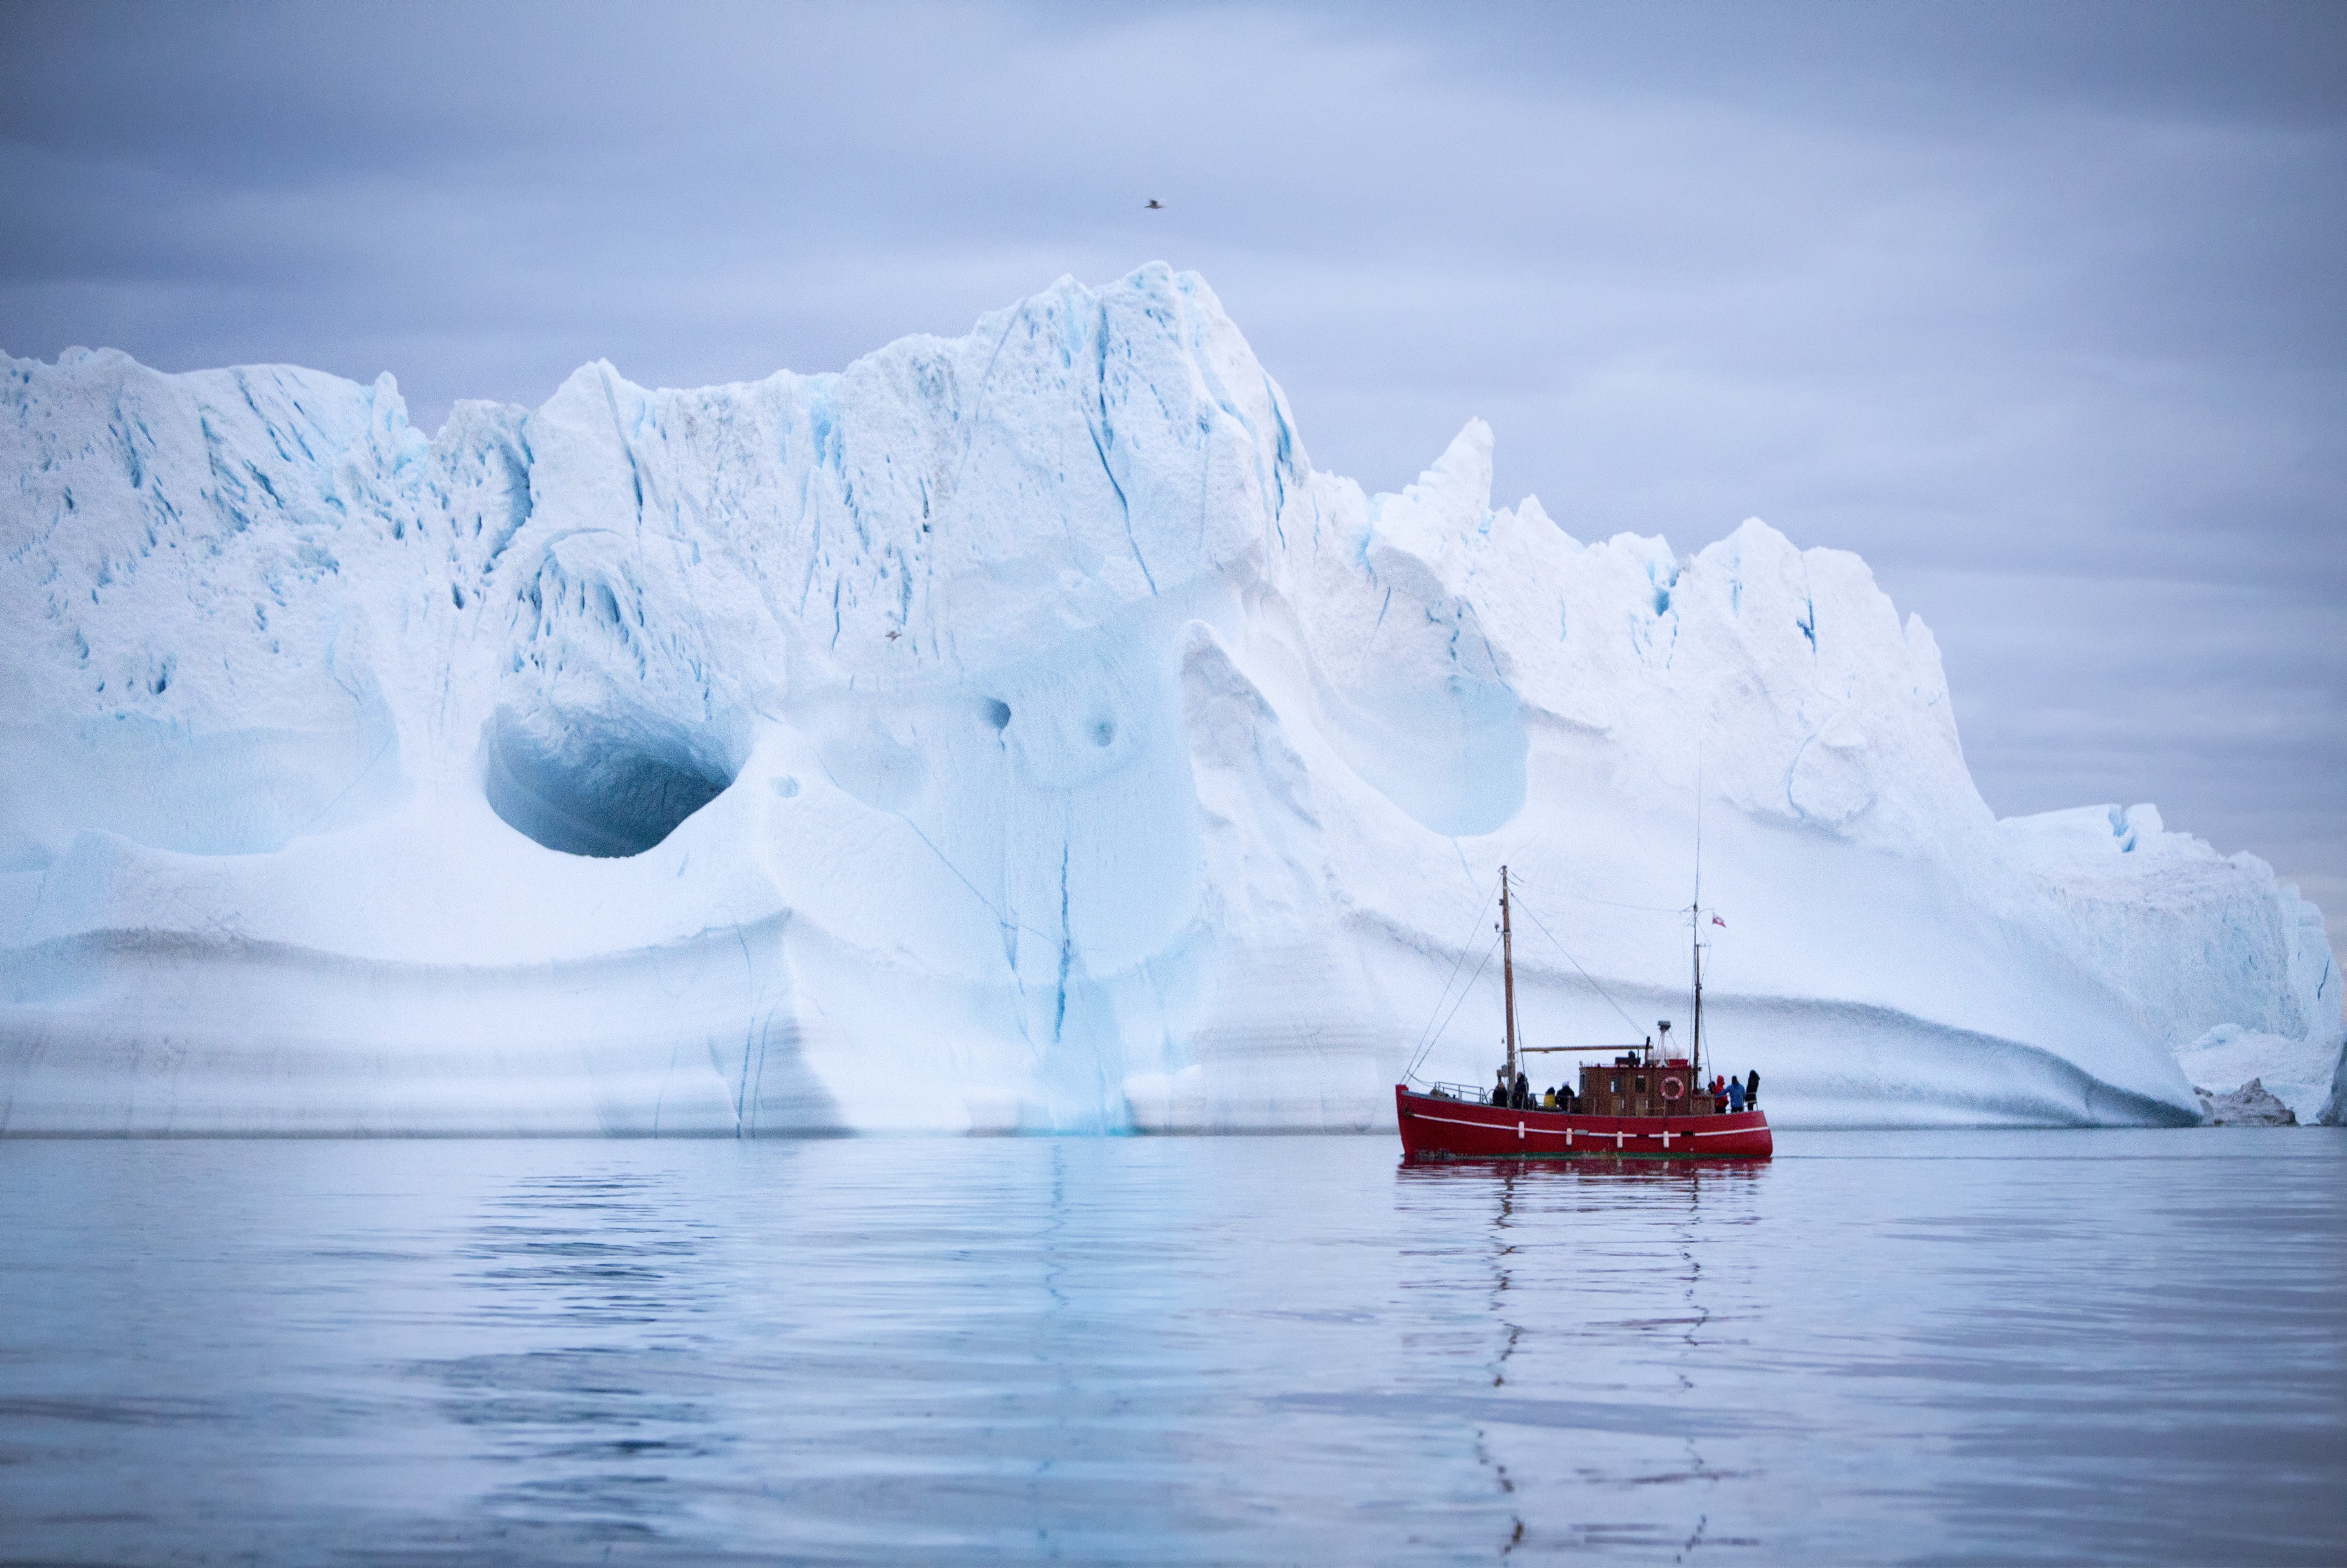 Tourists on a boat tour sailing by a giant iceberg near Ilulissat in North Greenland - Photographer: